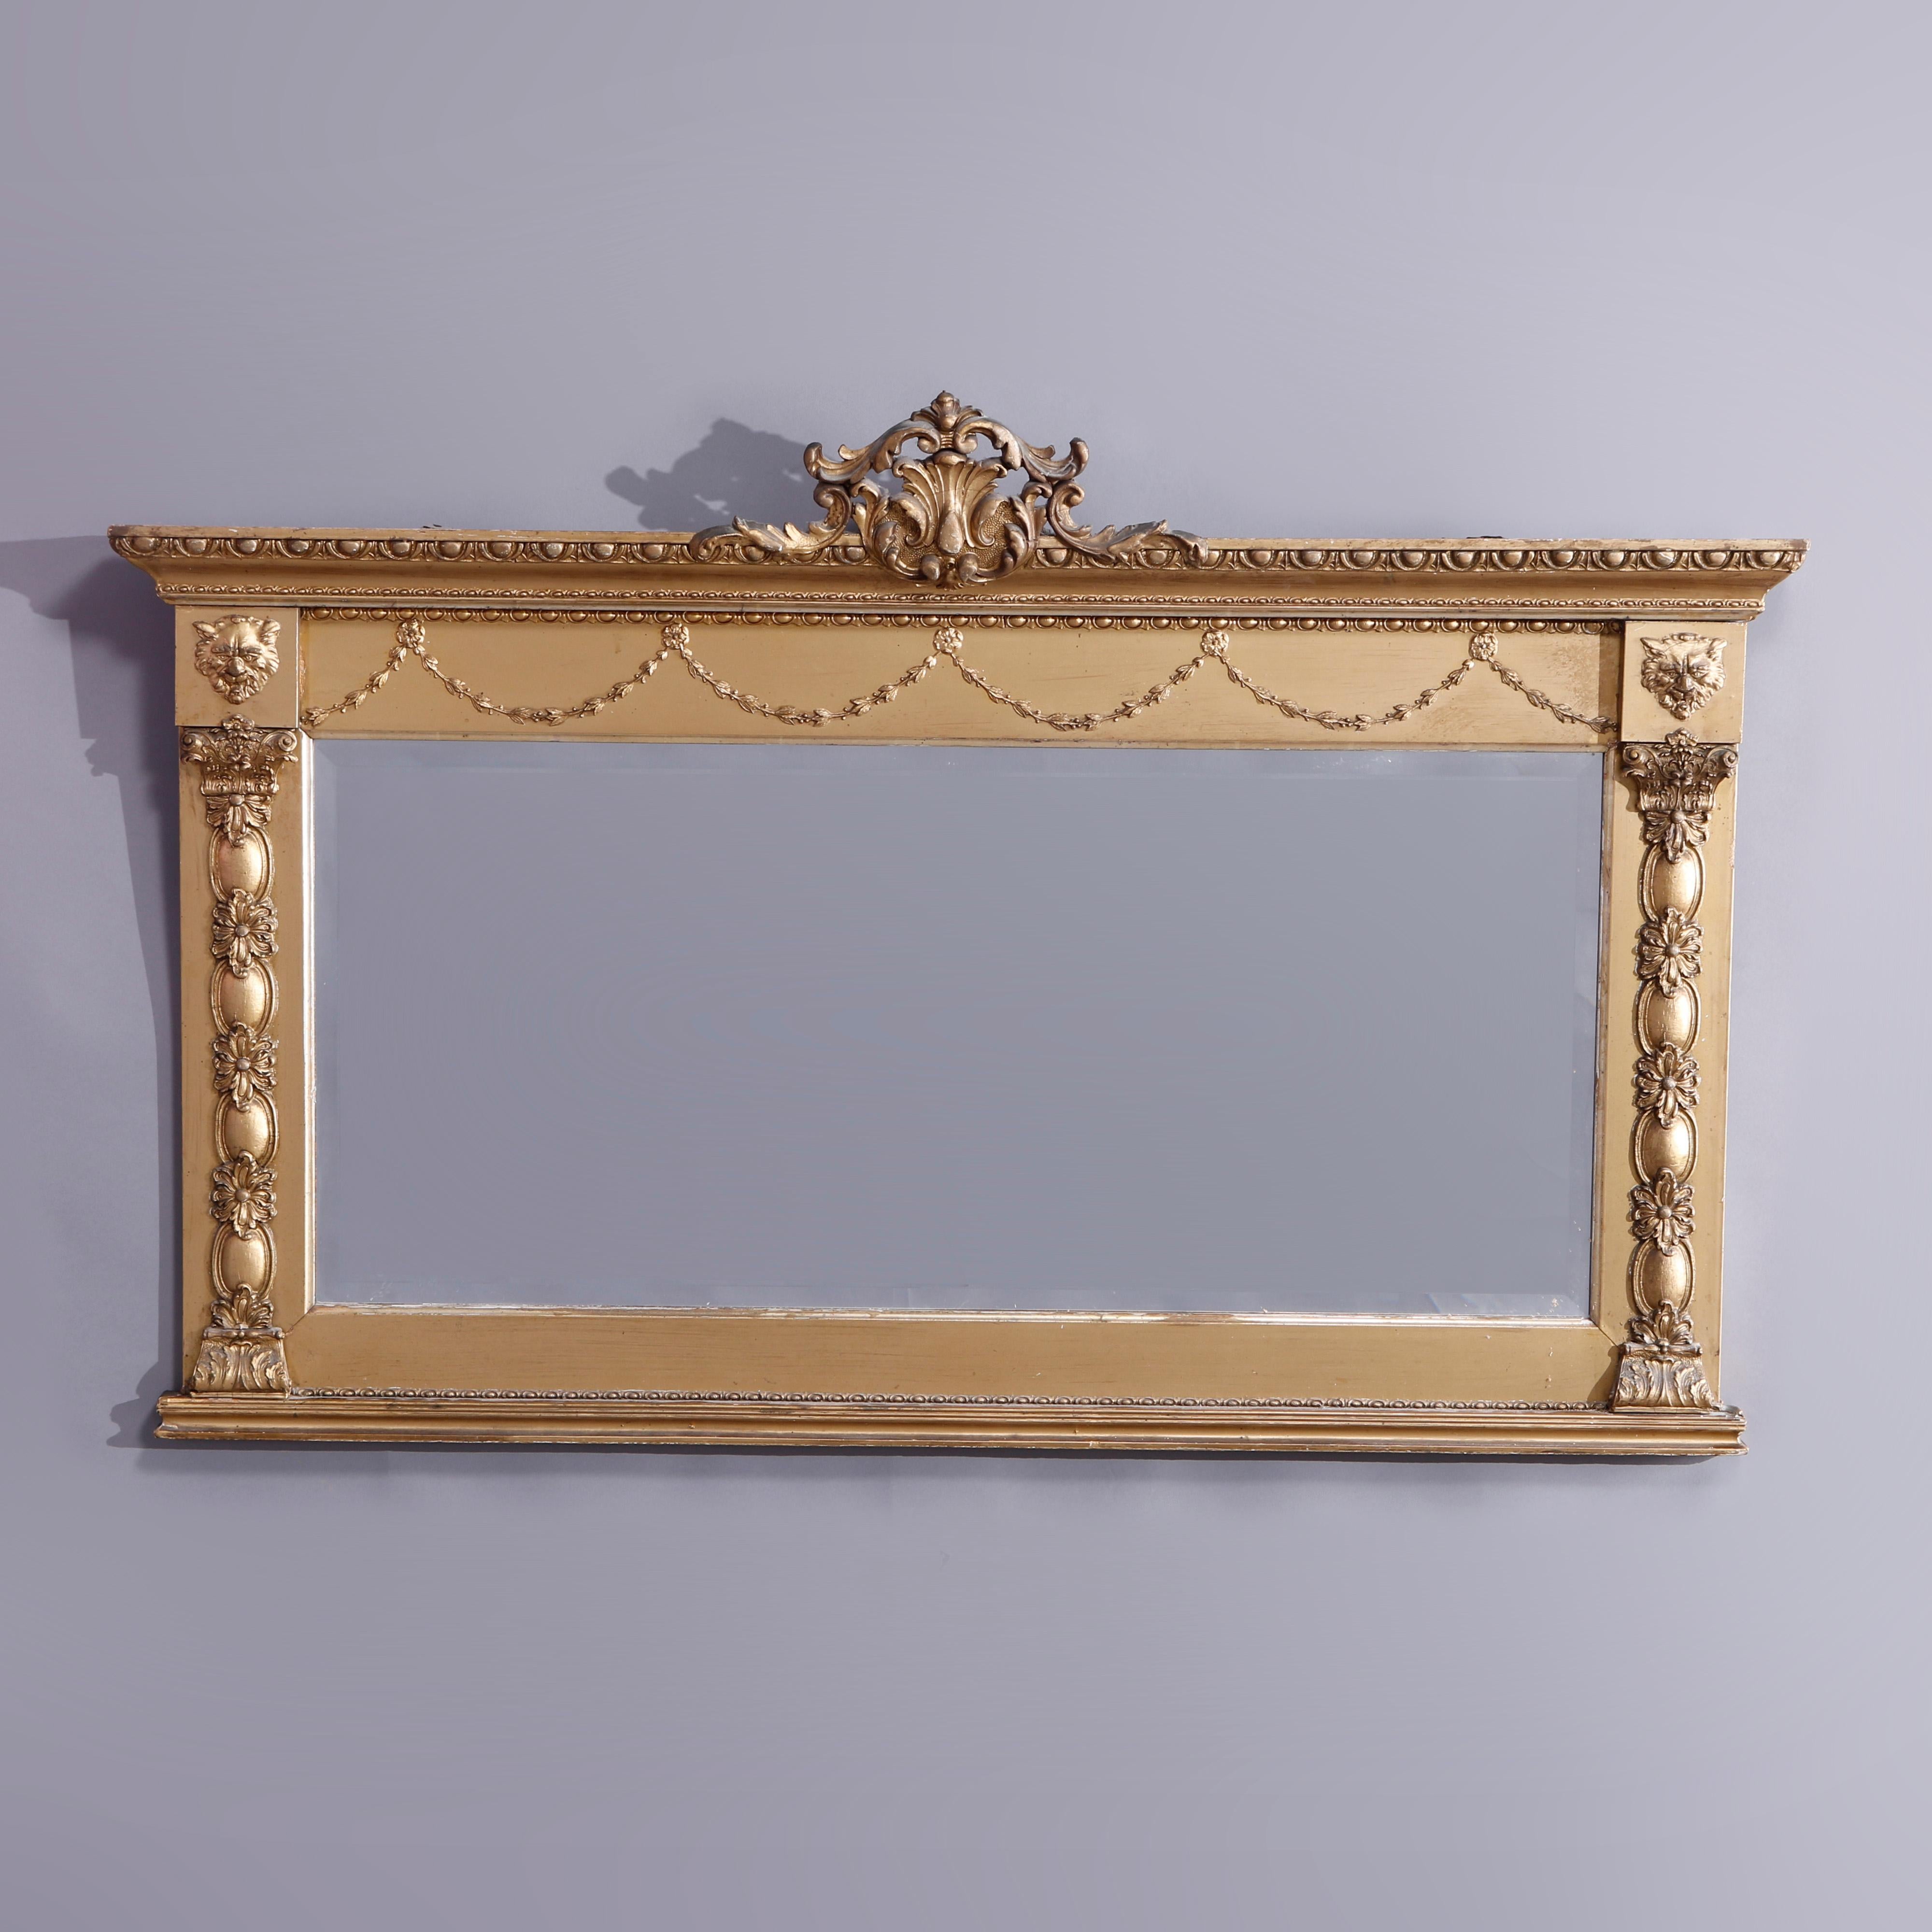 An antique large neoclassical wall mirror offers giltwood construction in horizontal form with scroll and foliate pierced crest over frieze with drape garland elements and lion rosettes surmounting mirror with flanking stylized Corinthian column